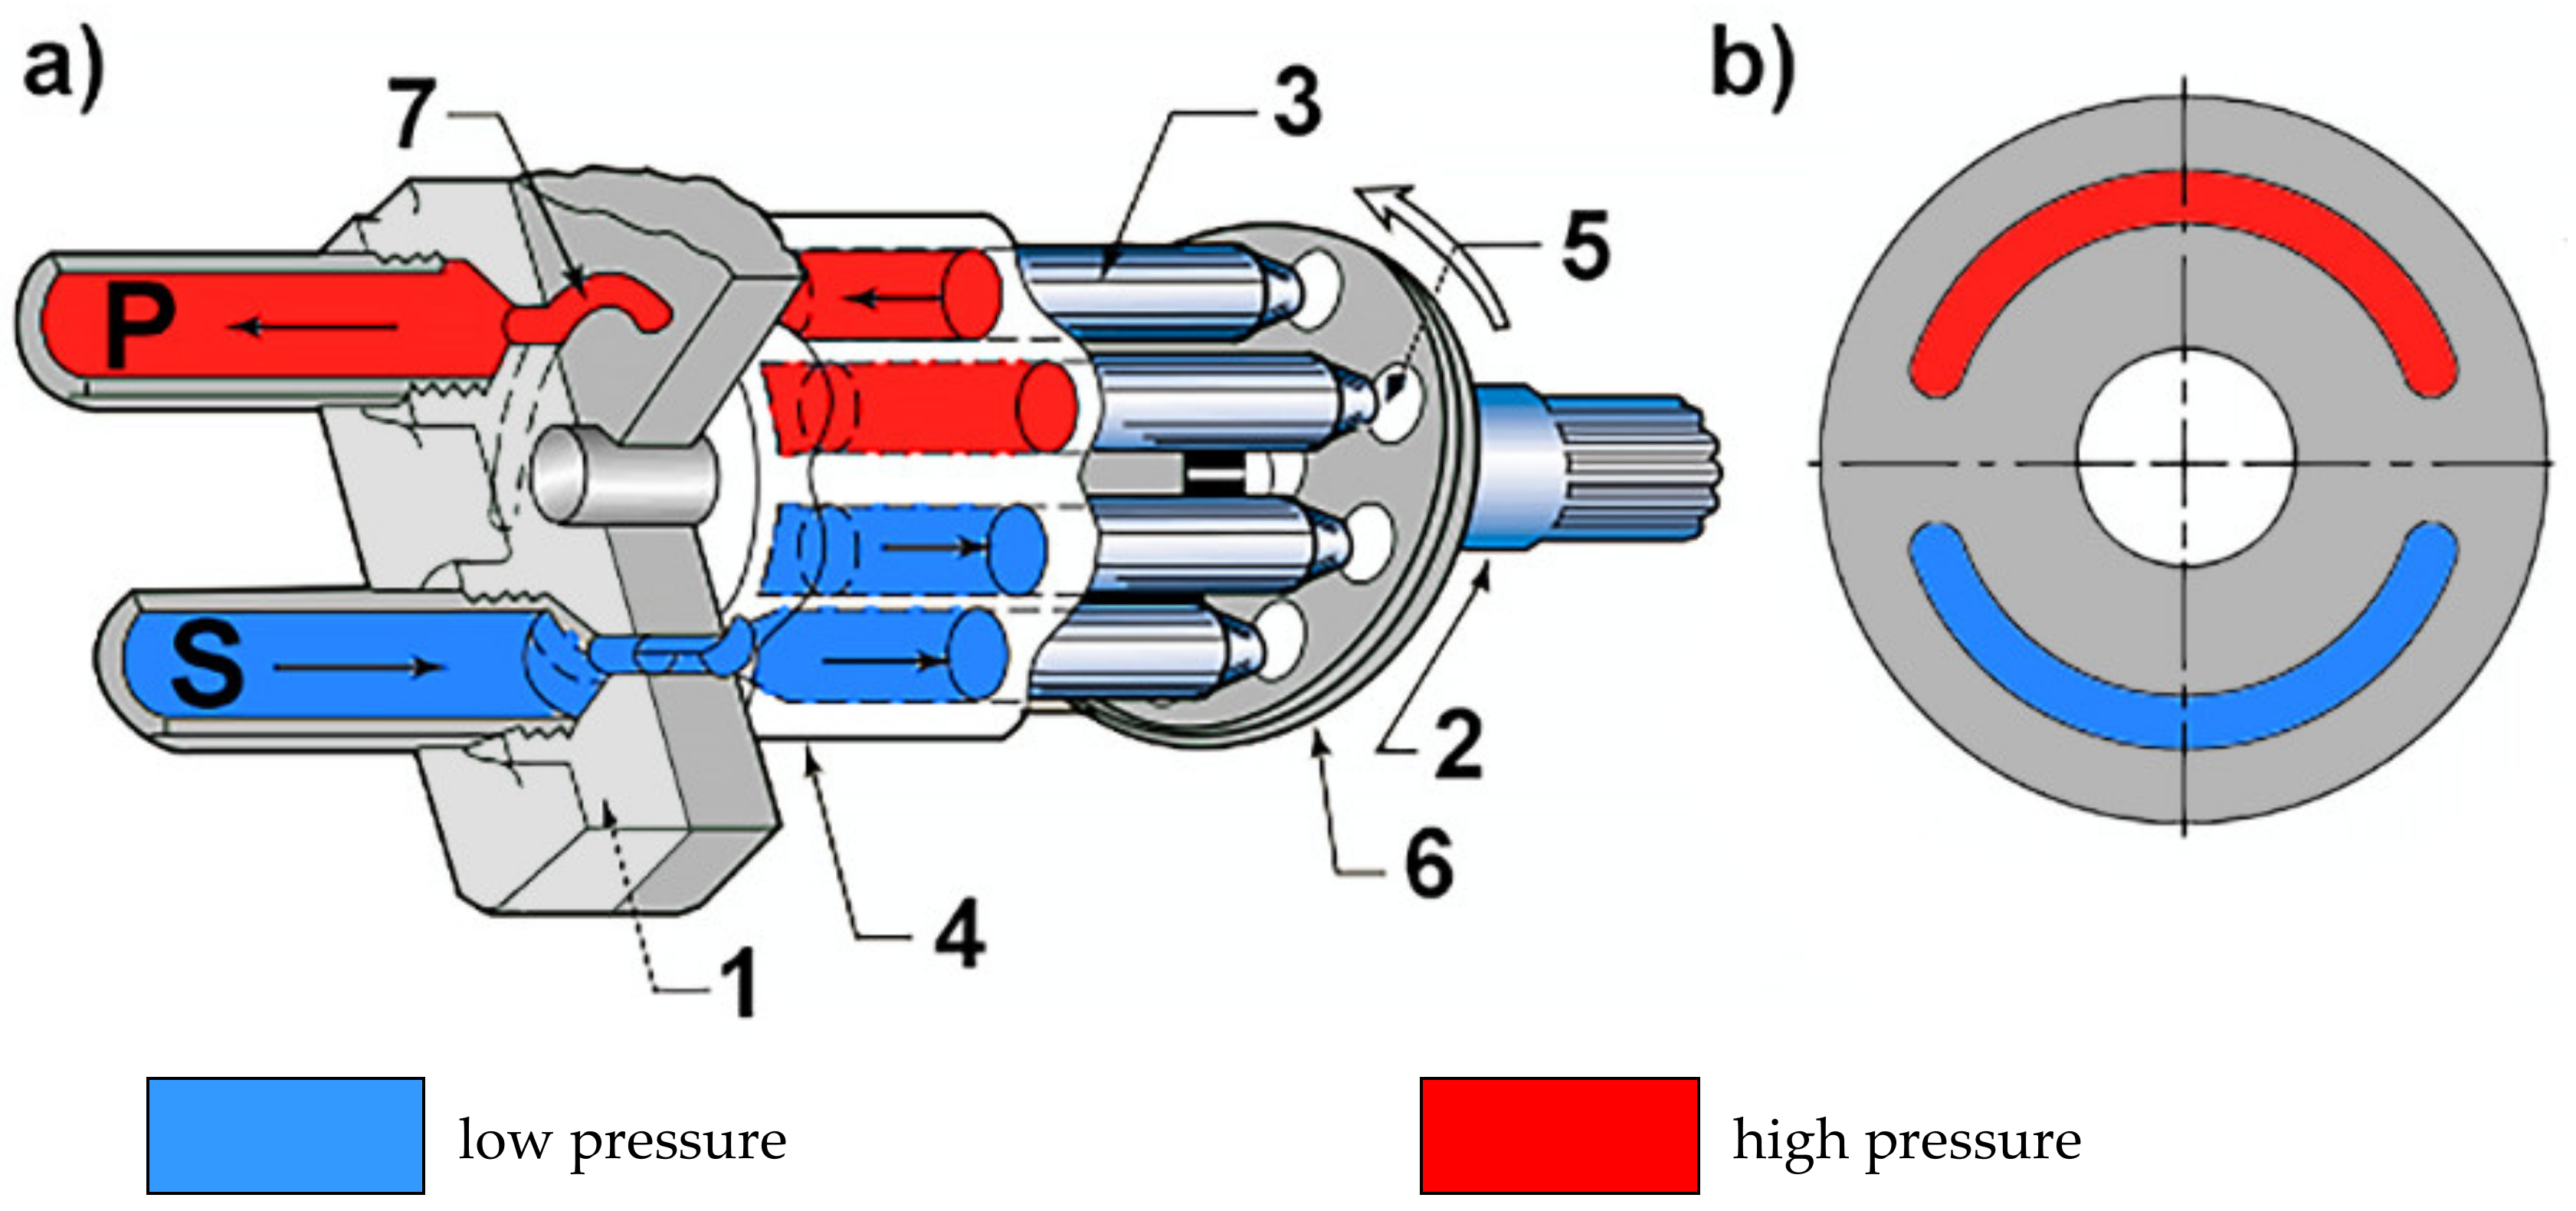 Energies | Free Full-Text | Influence of Properties of Hydraulic Fluid on  Pressure Peaks in Axial Piston Pumps' Chambers